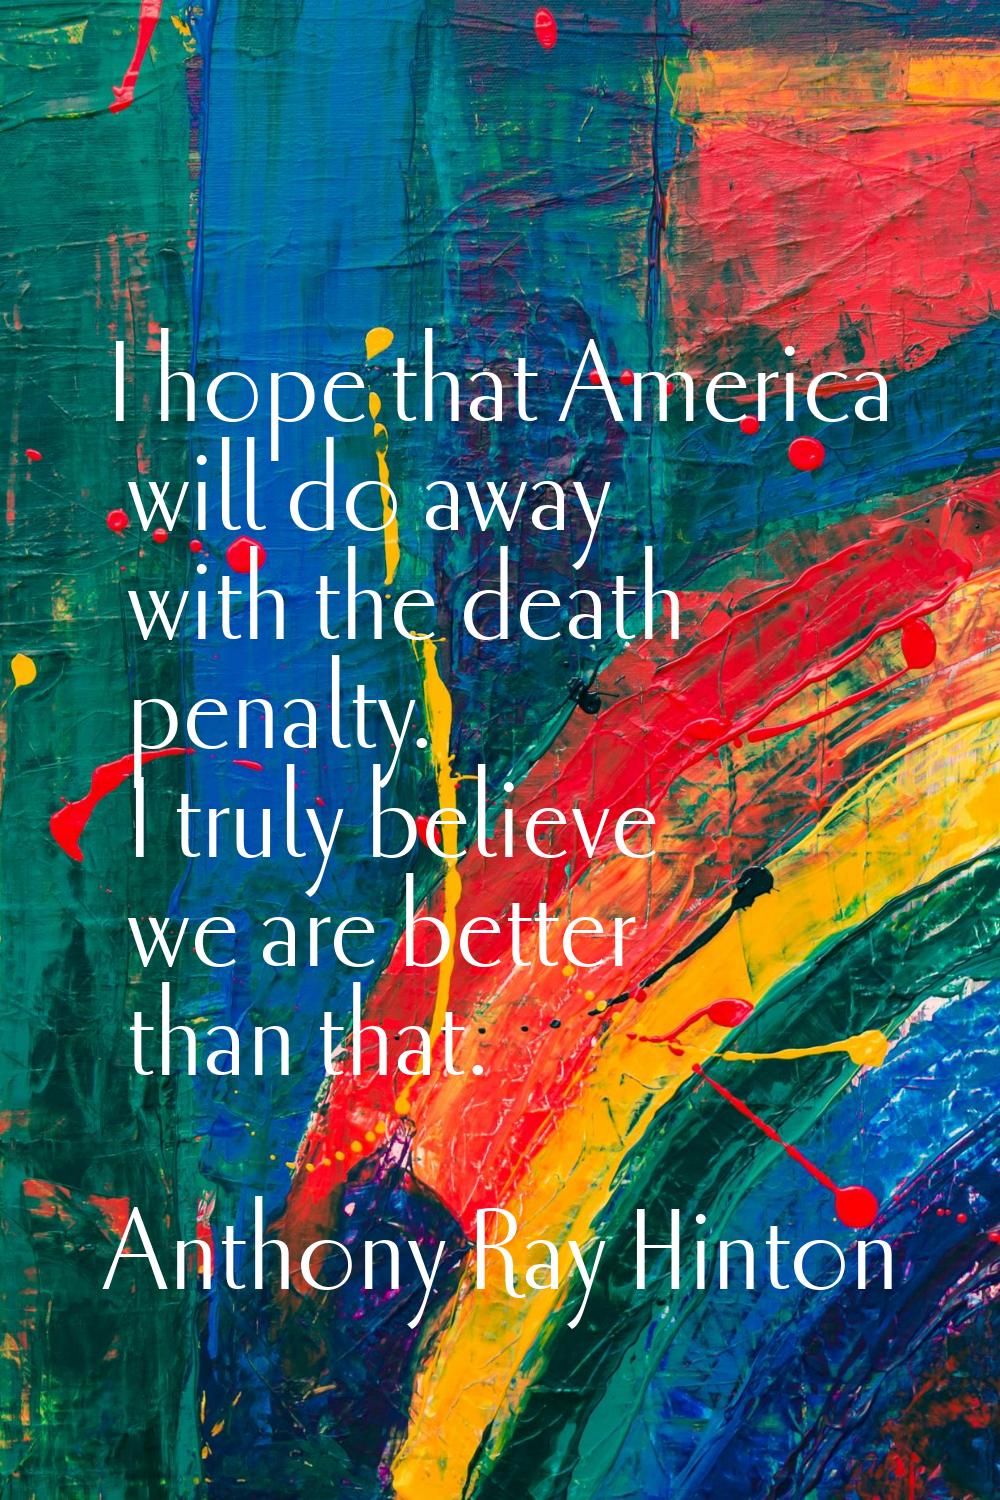 I hope that America will do away with the death penalty. I truly believe we are better than that.